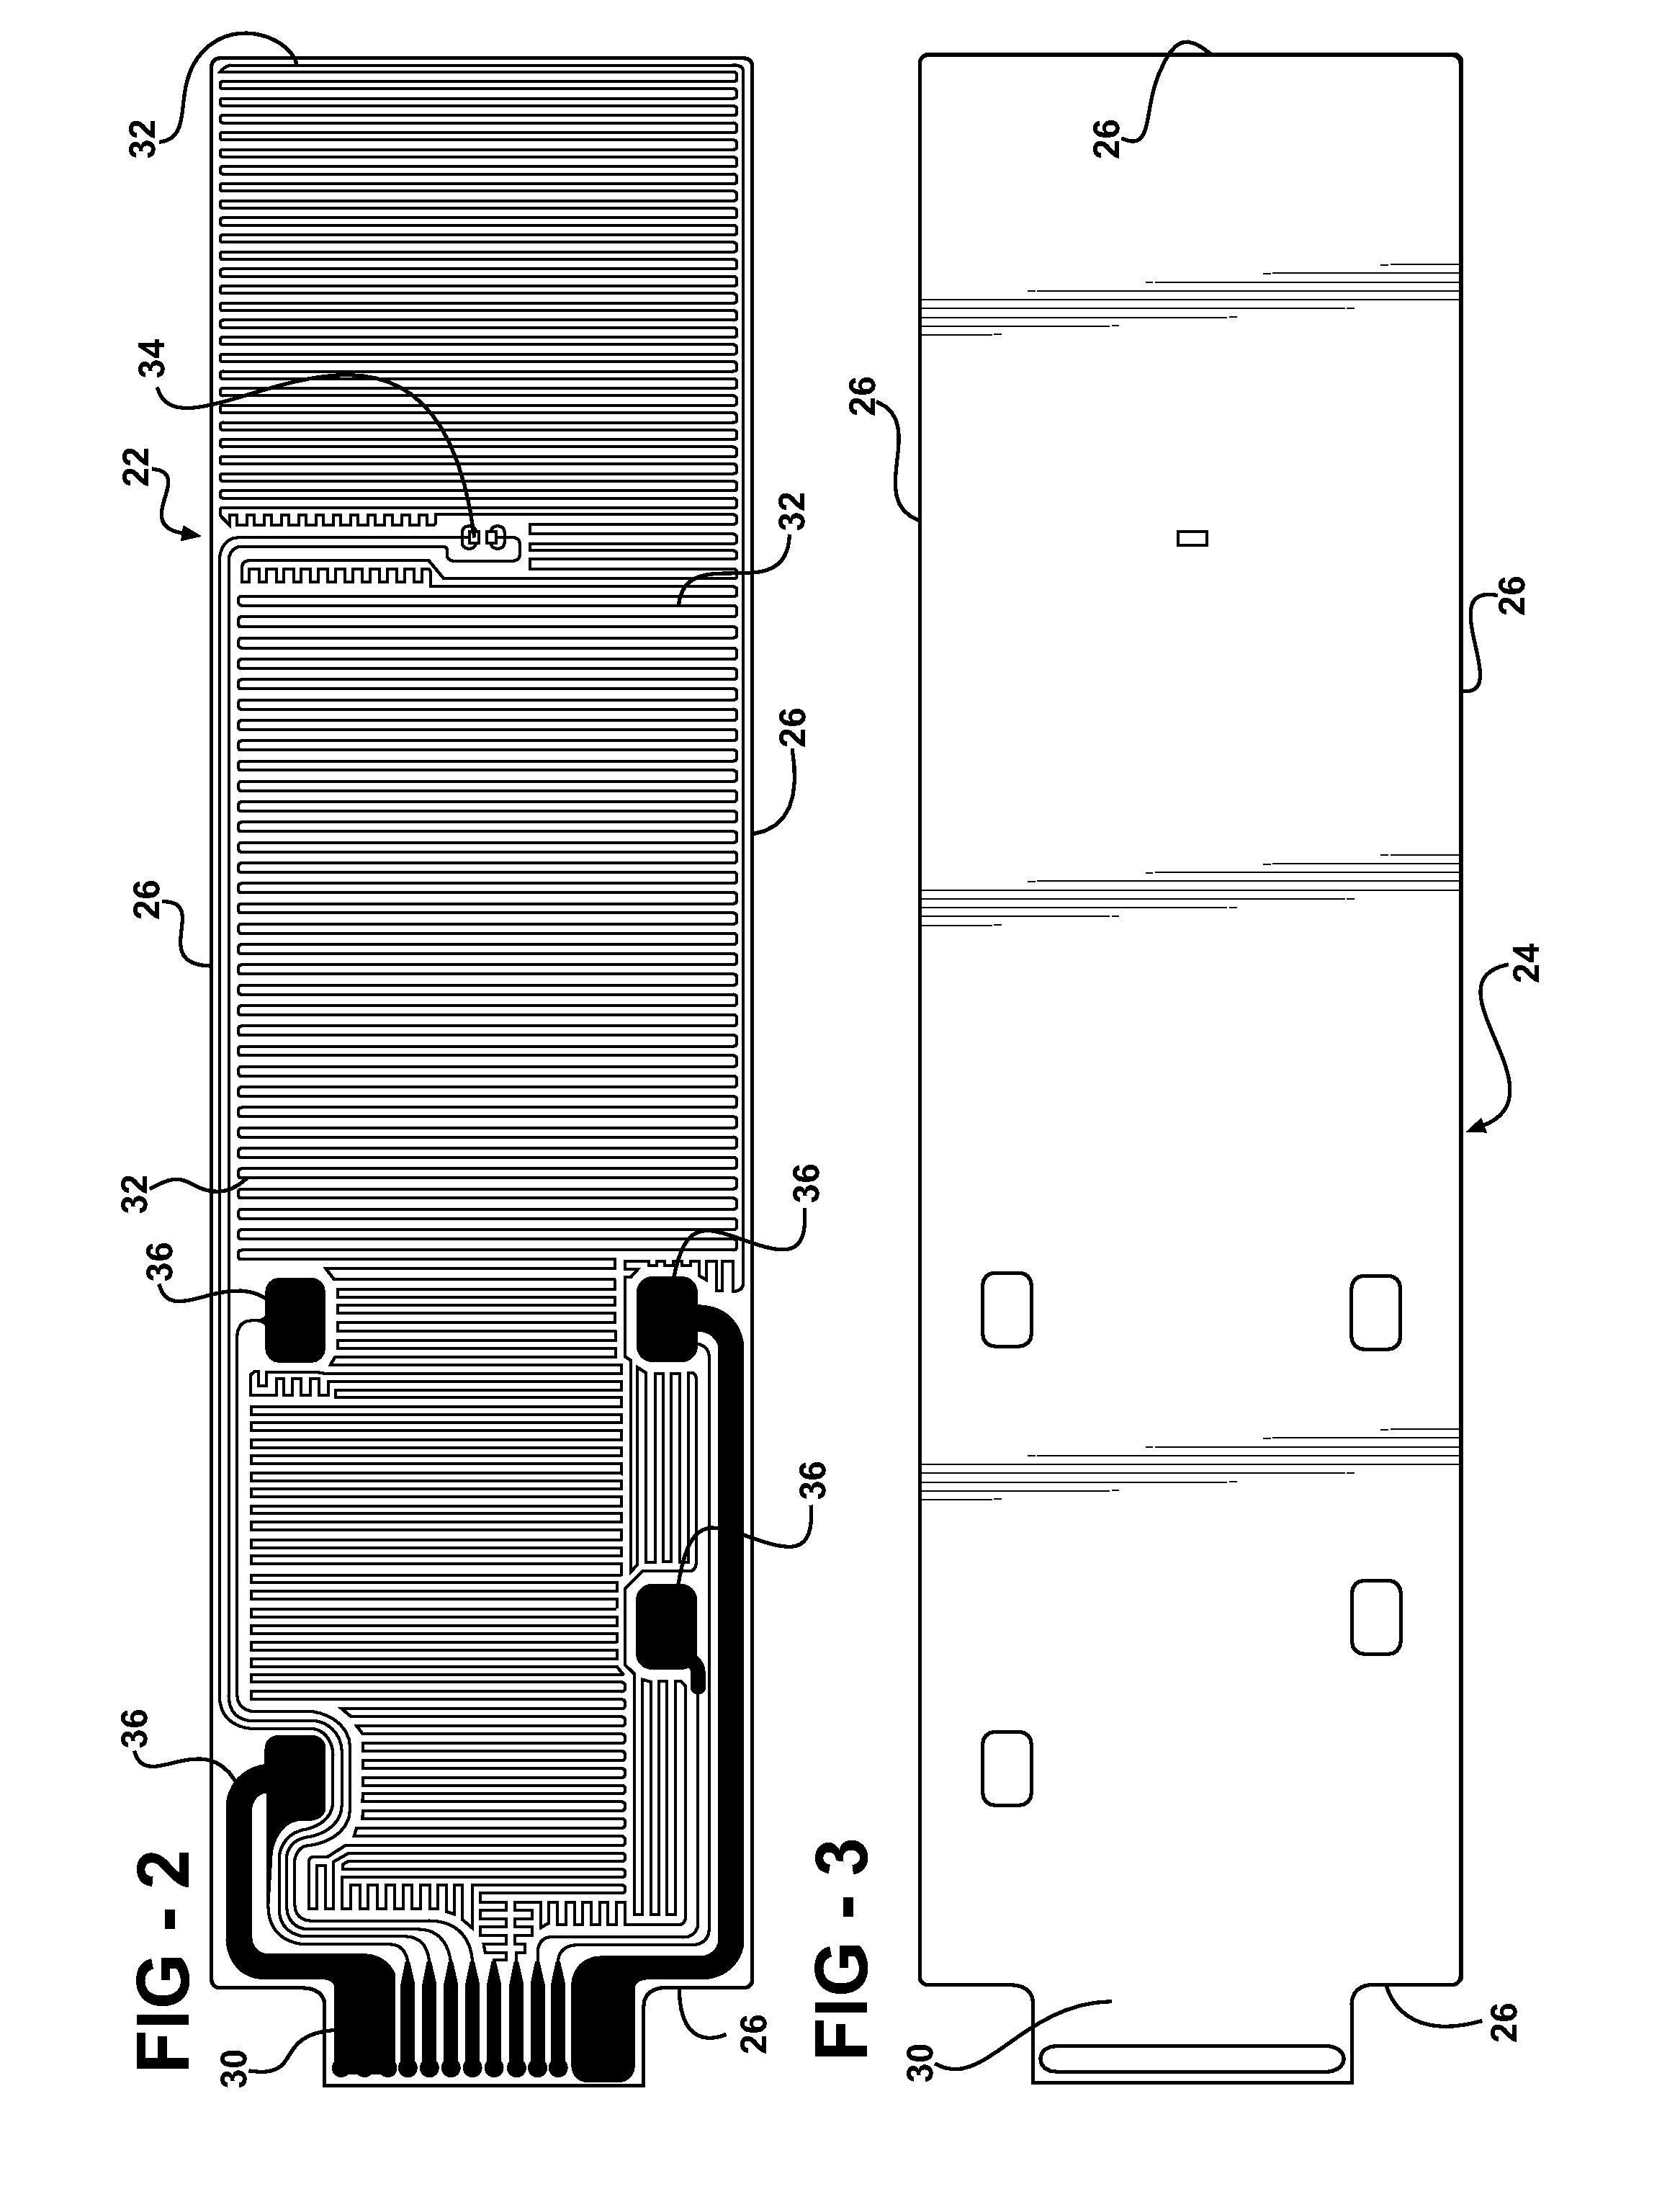 Battery pack assembly with integrated heater